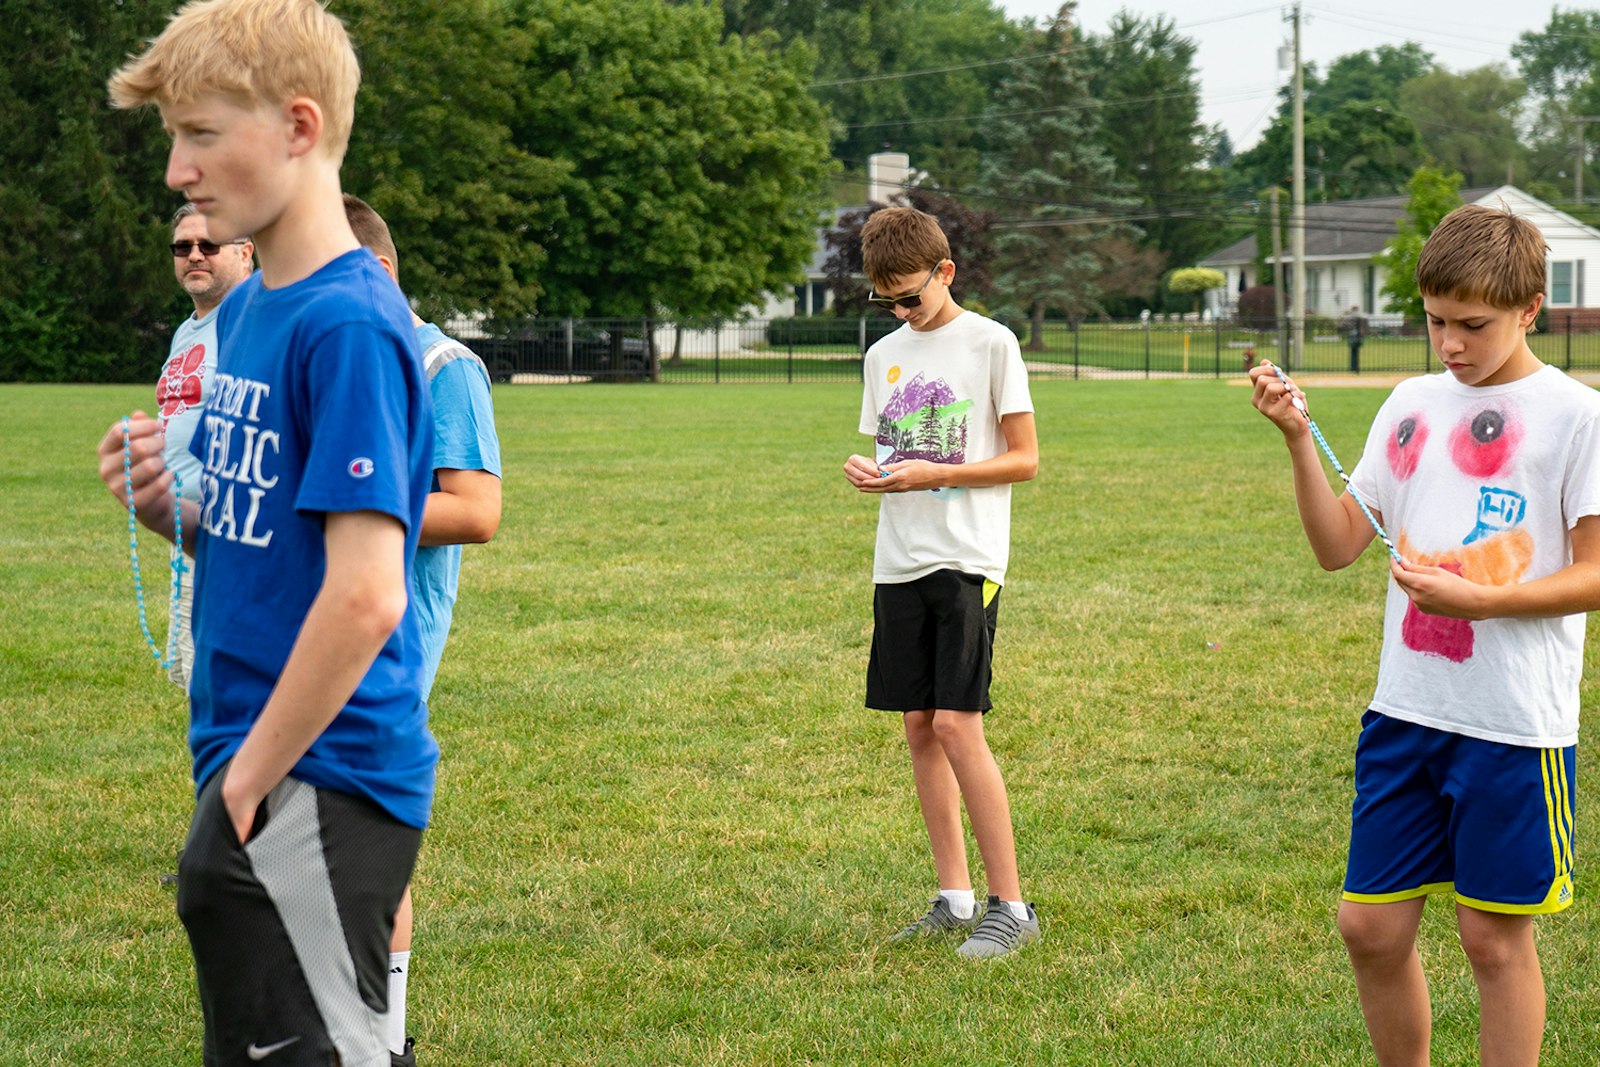 Members of the "Exercitus Mariae" group pray the rosary as they prepare for workouts Aug. 20. Often, boys attend the meetings with their fathers, sharing what they've learned about their faith.